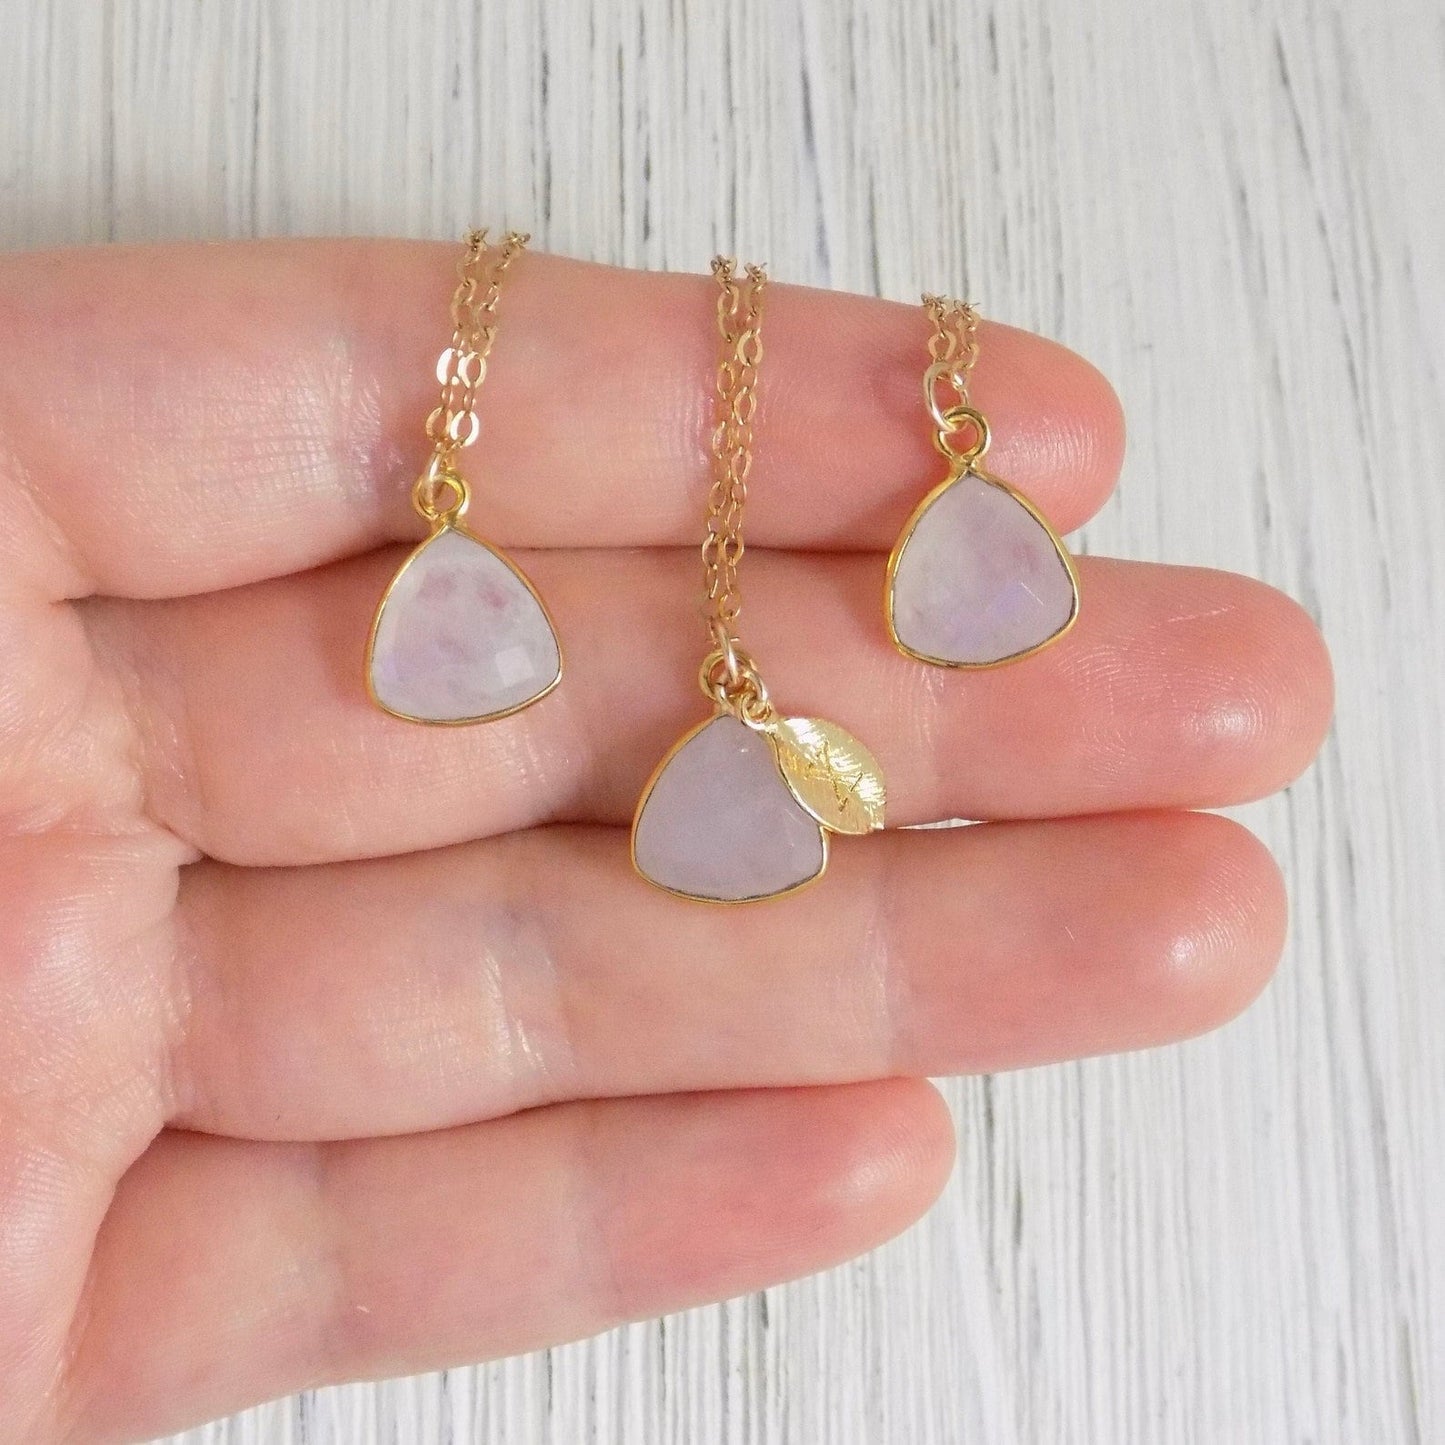 Moonstone Necklace - White Moonstone Necklace Gold